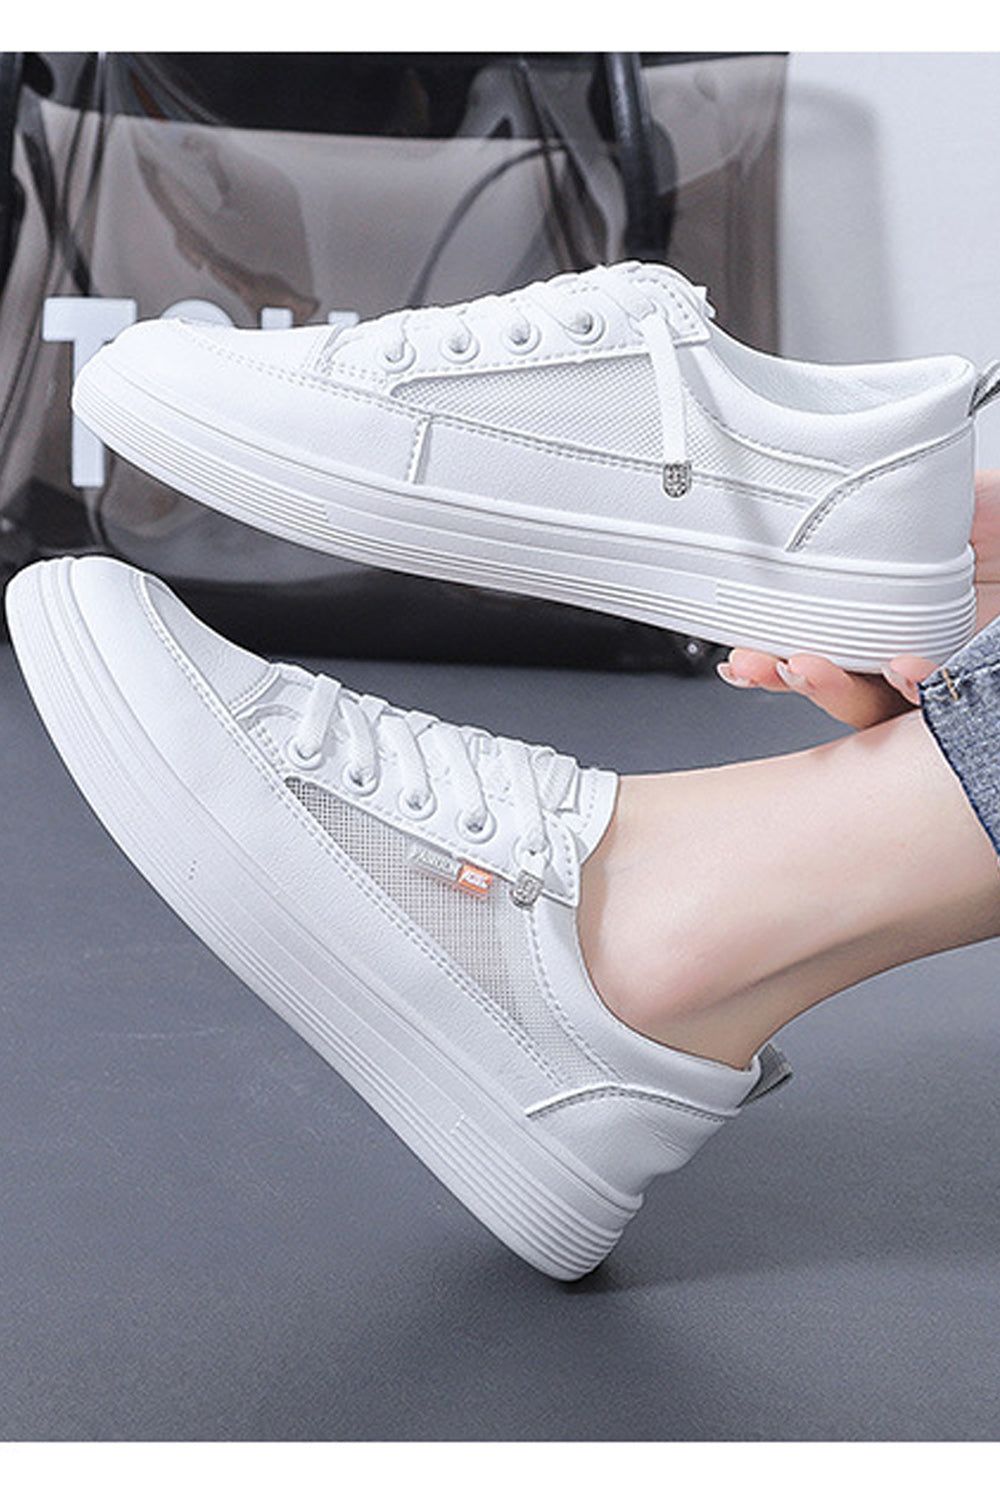 Women Solid Colored Fashion Round Toe Casual Thick Rubber Soled Athletic Sneaker Shoes - WSC15560